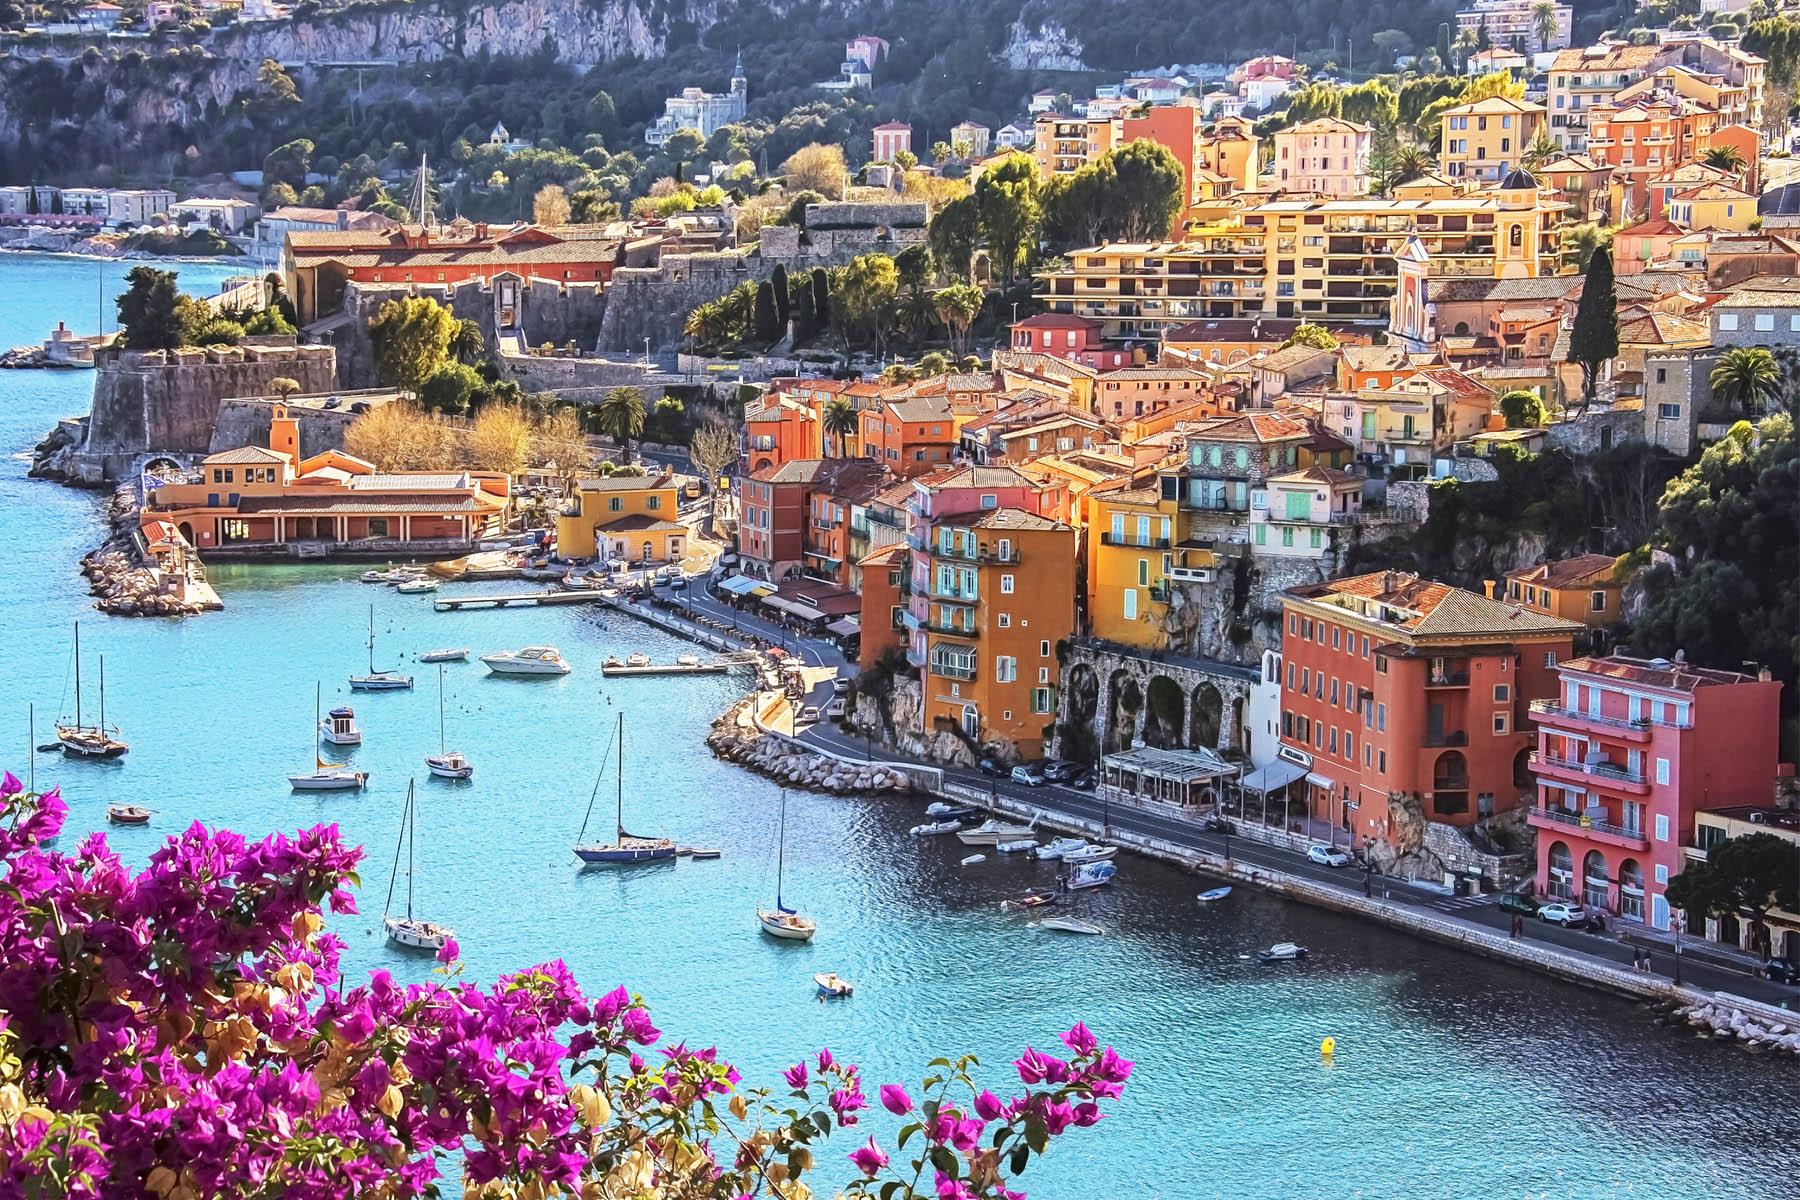 A photo of colourful houses along the French Riviera, with boats floating along the bank.